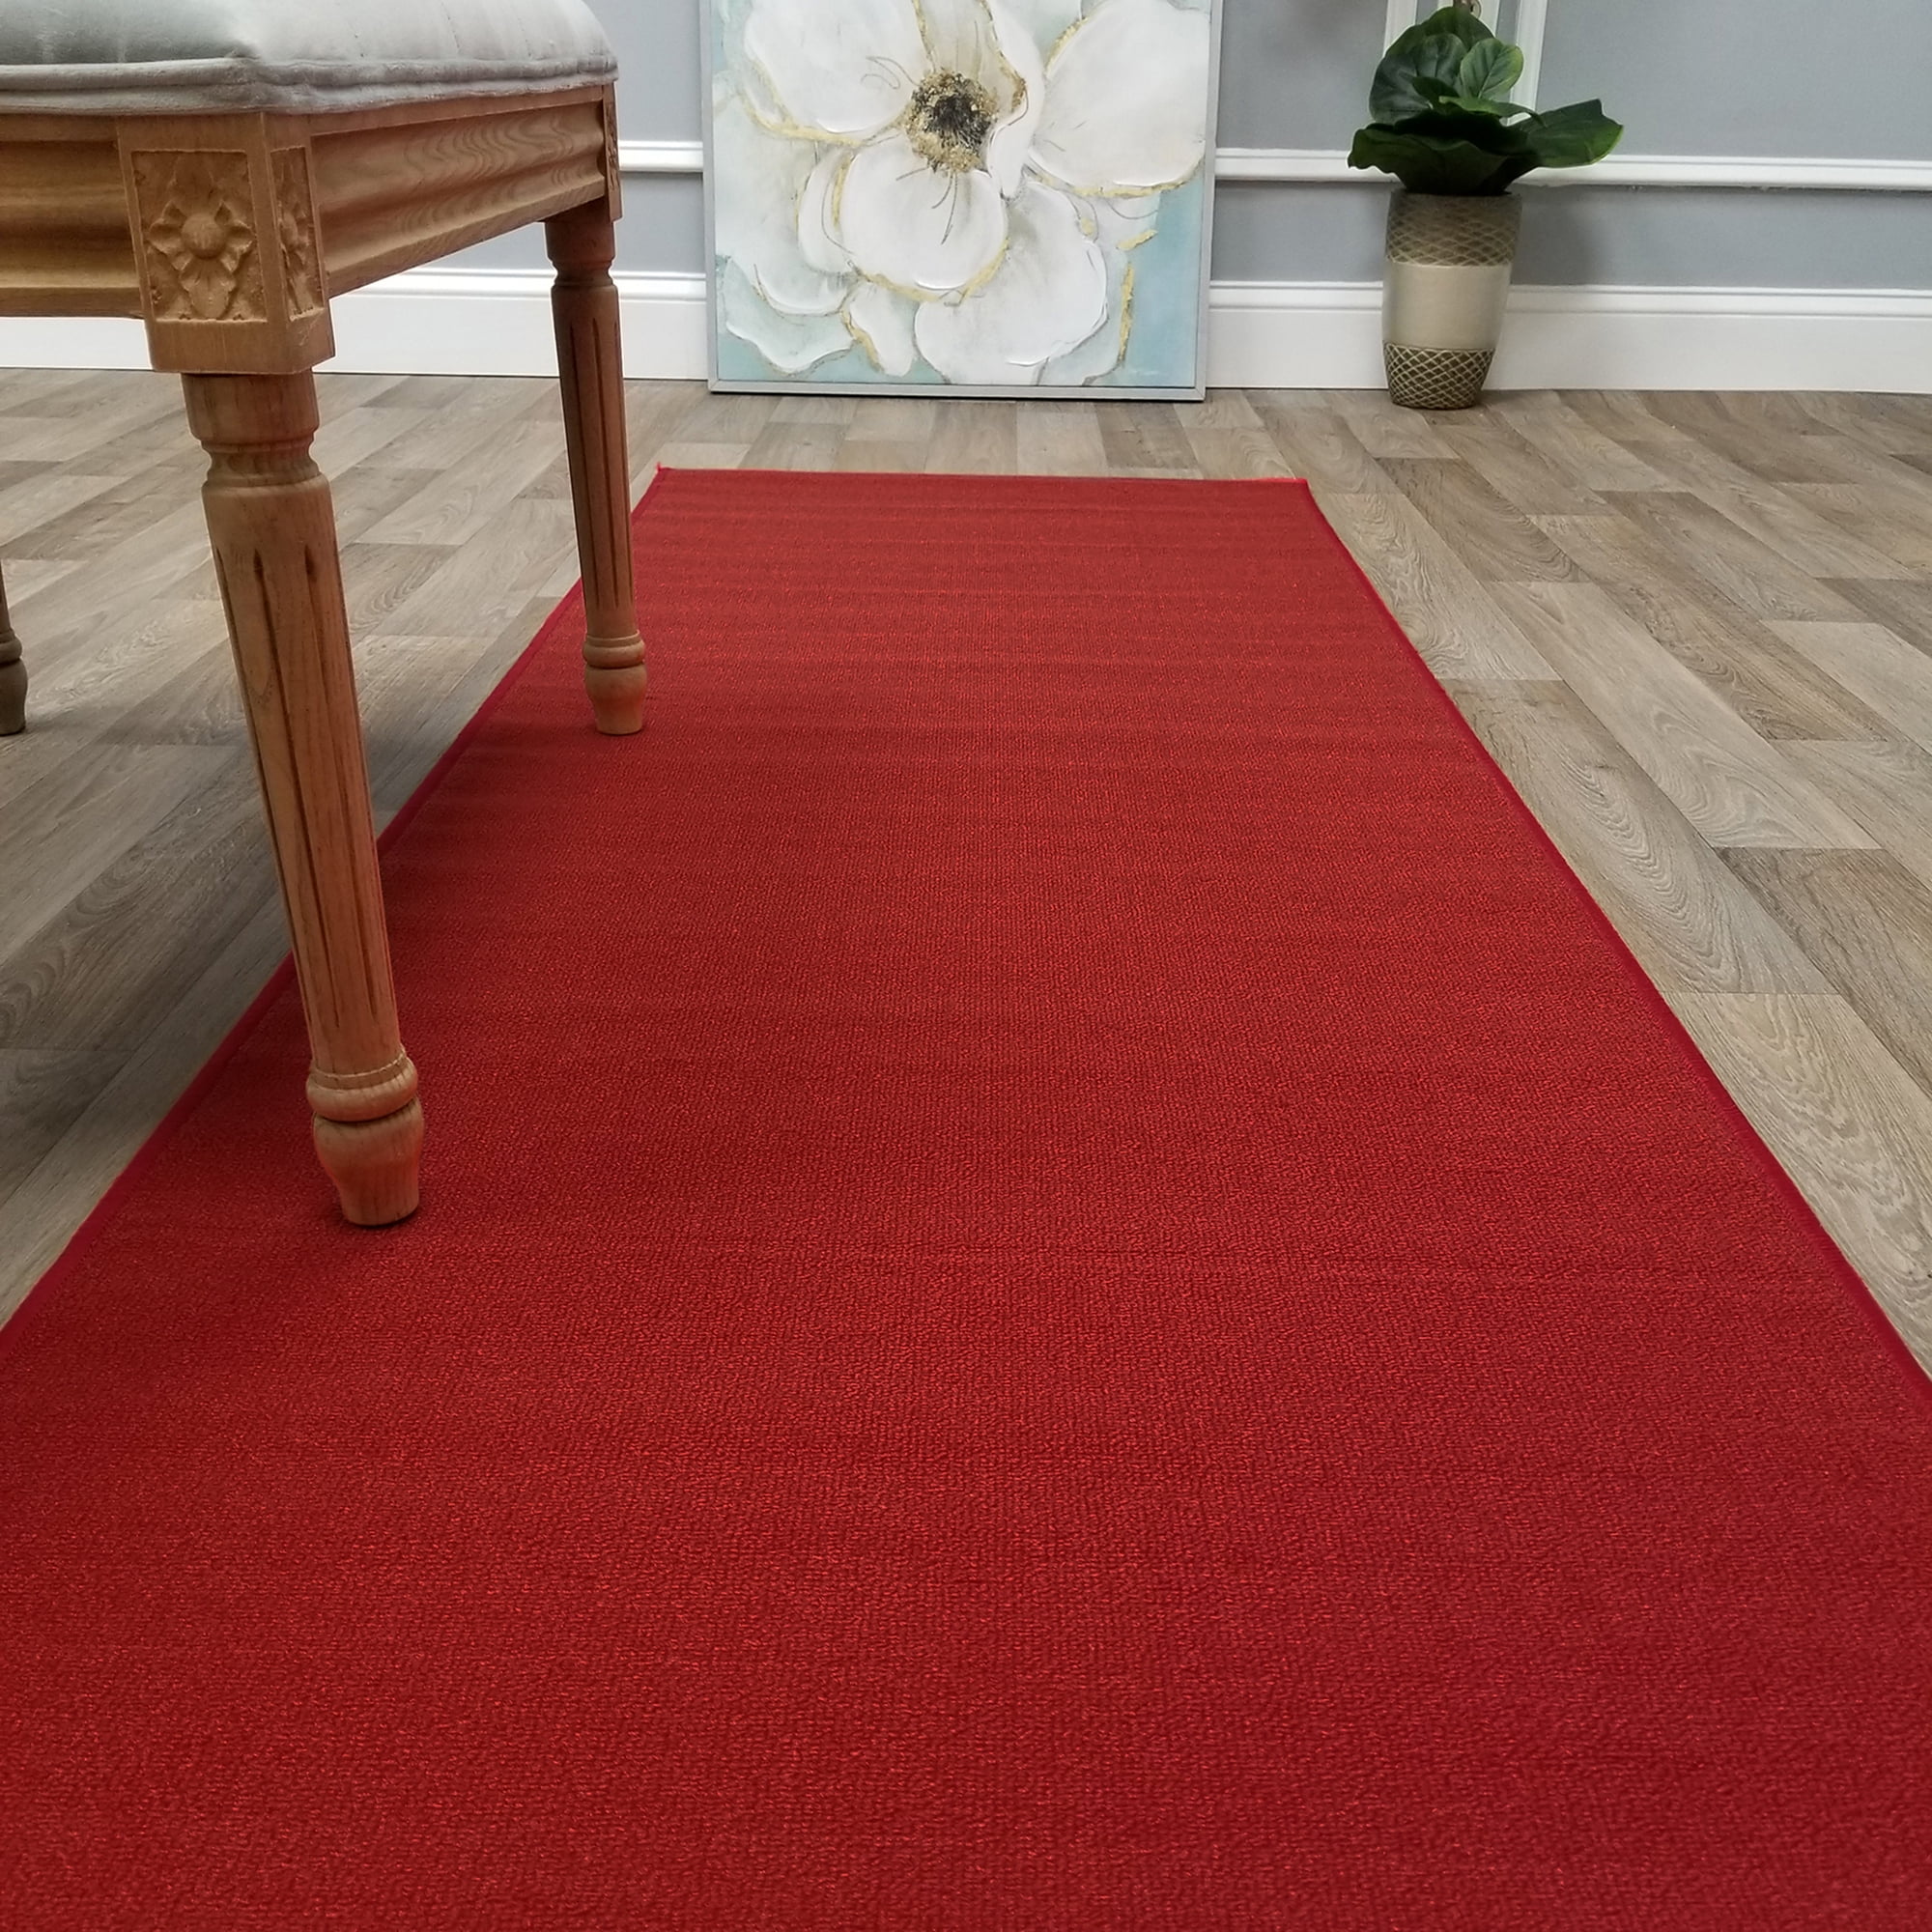 Red, 3x10Ft Happybuy 3Ft X 10Ft Large Red Carpet Runner Rug Solid TRP Rubber Backed Hollywood Runner Carpet Non-Slip Stair Patio Party Decor Wedding 1M X 3M Aisle Floor Runner Rug Various Sizes